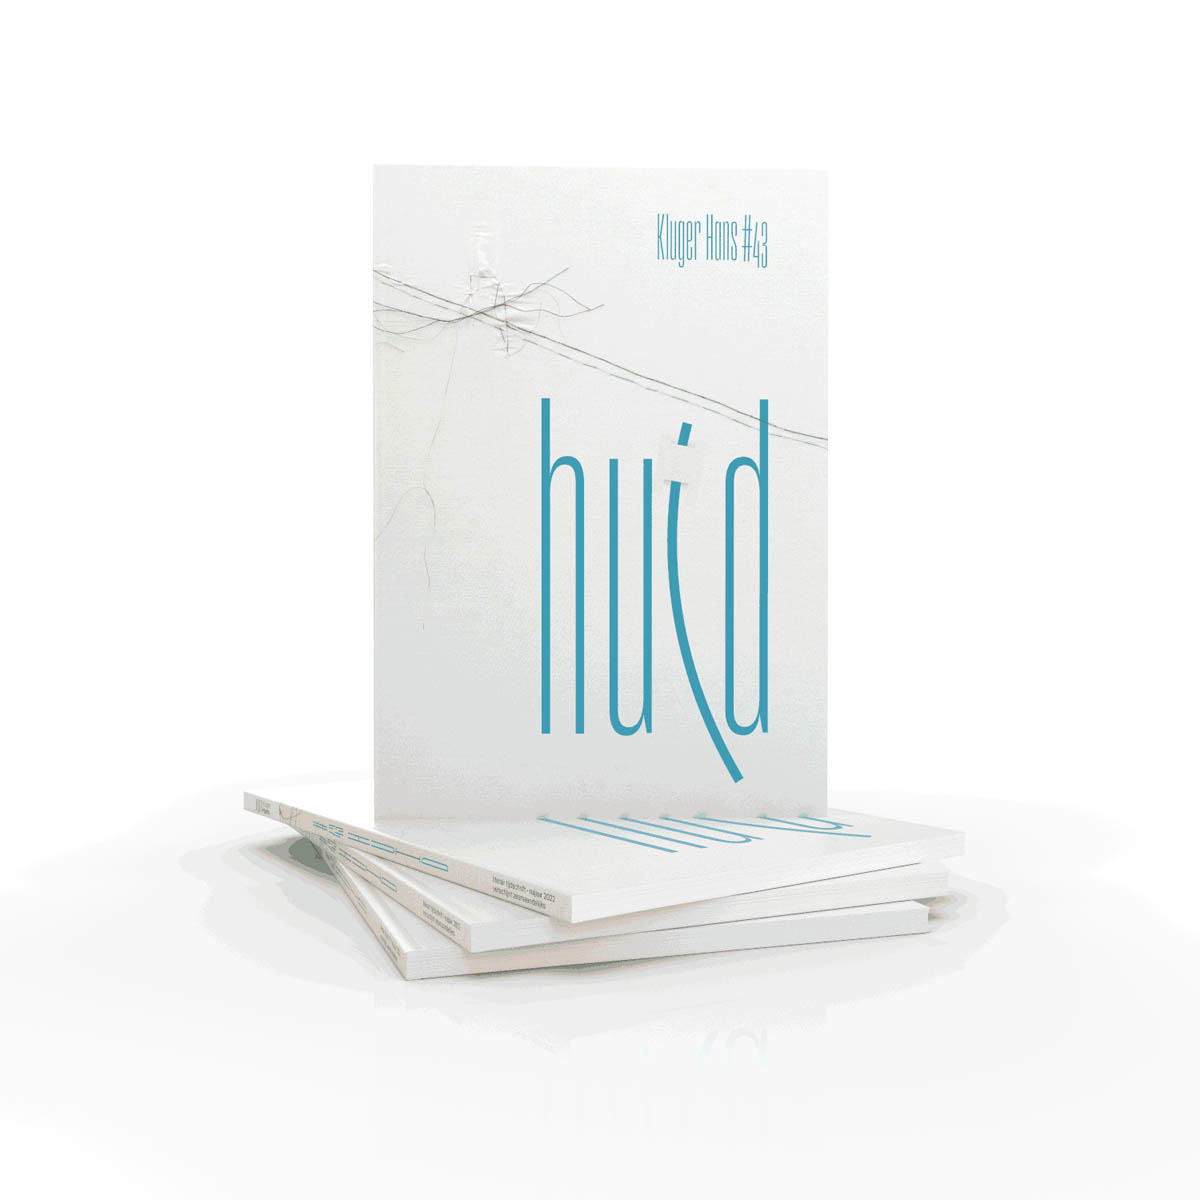 Featured image for “#43 Huid”